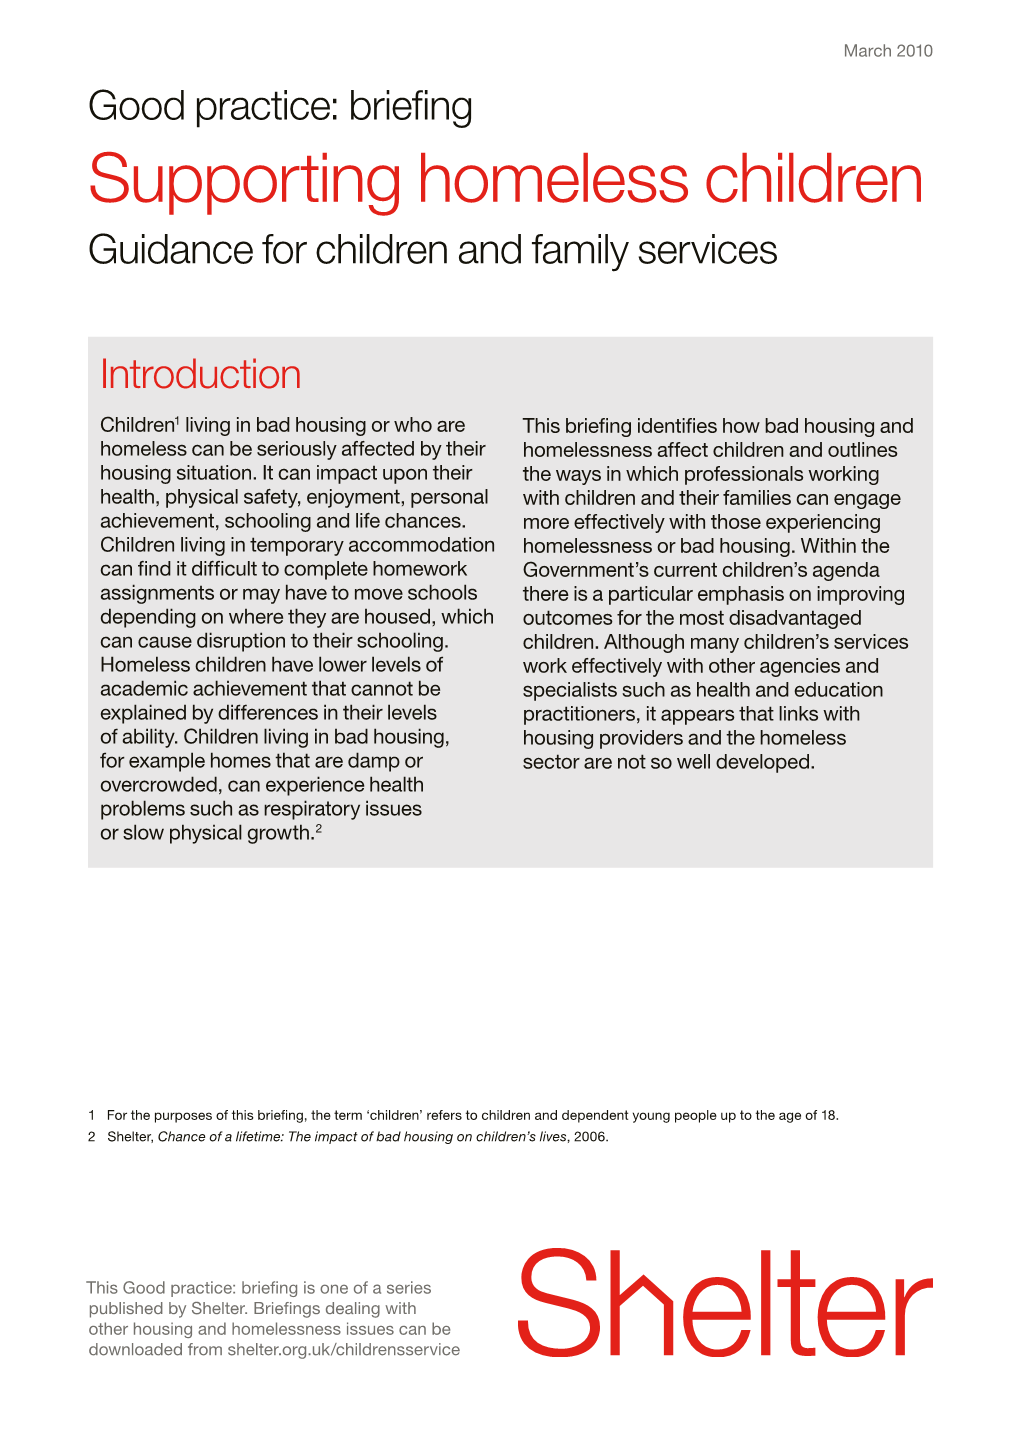 Supporting Homeless Children Guidance for Children and Family Services